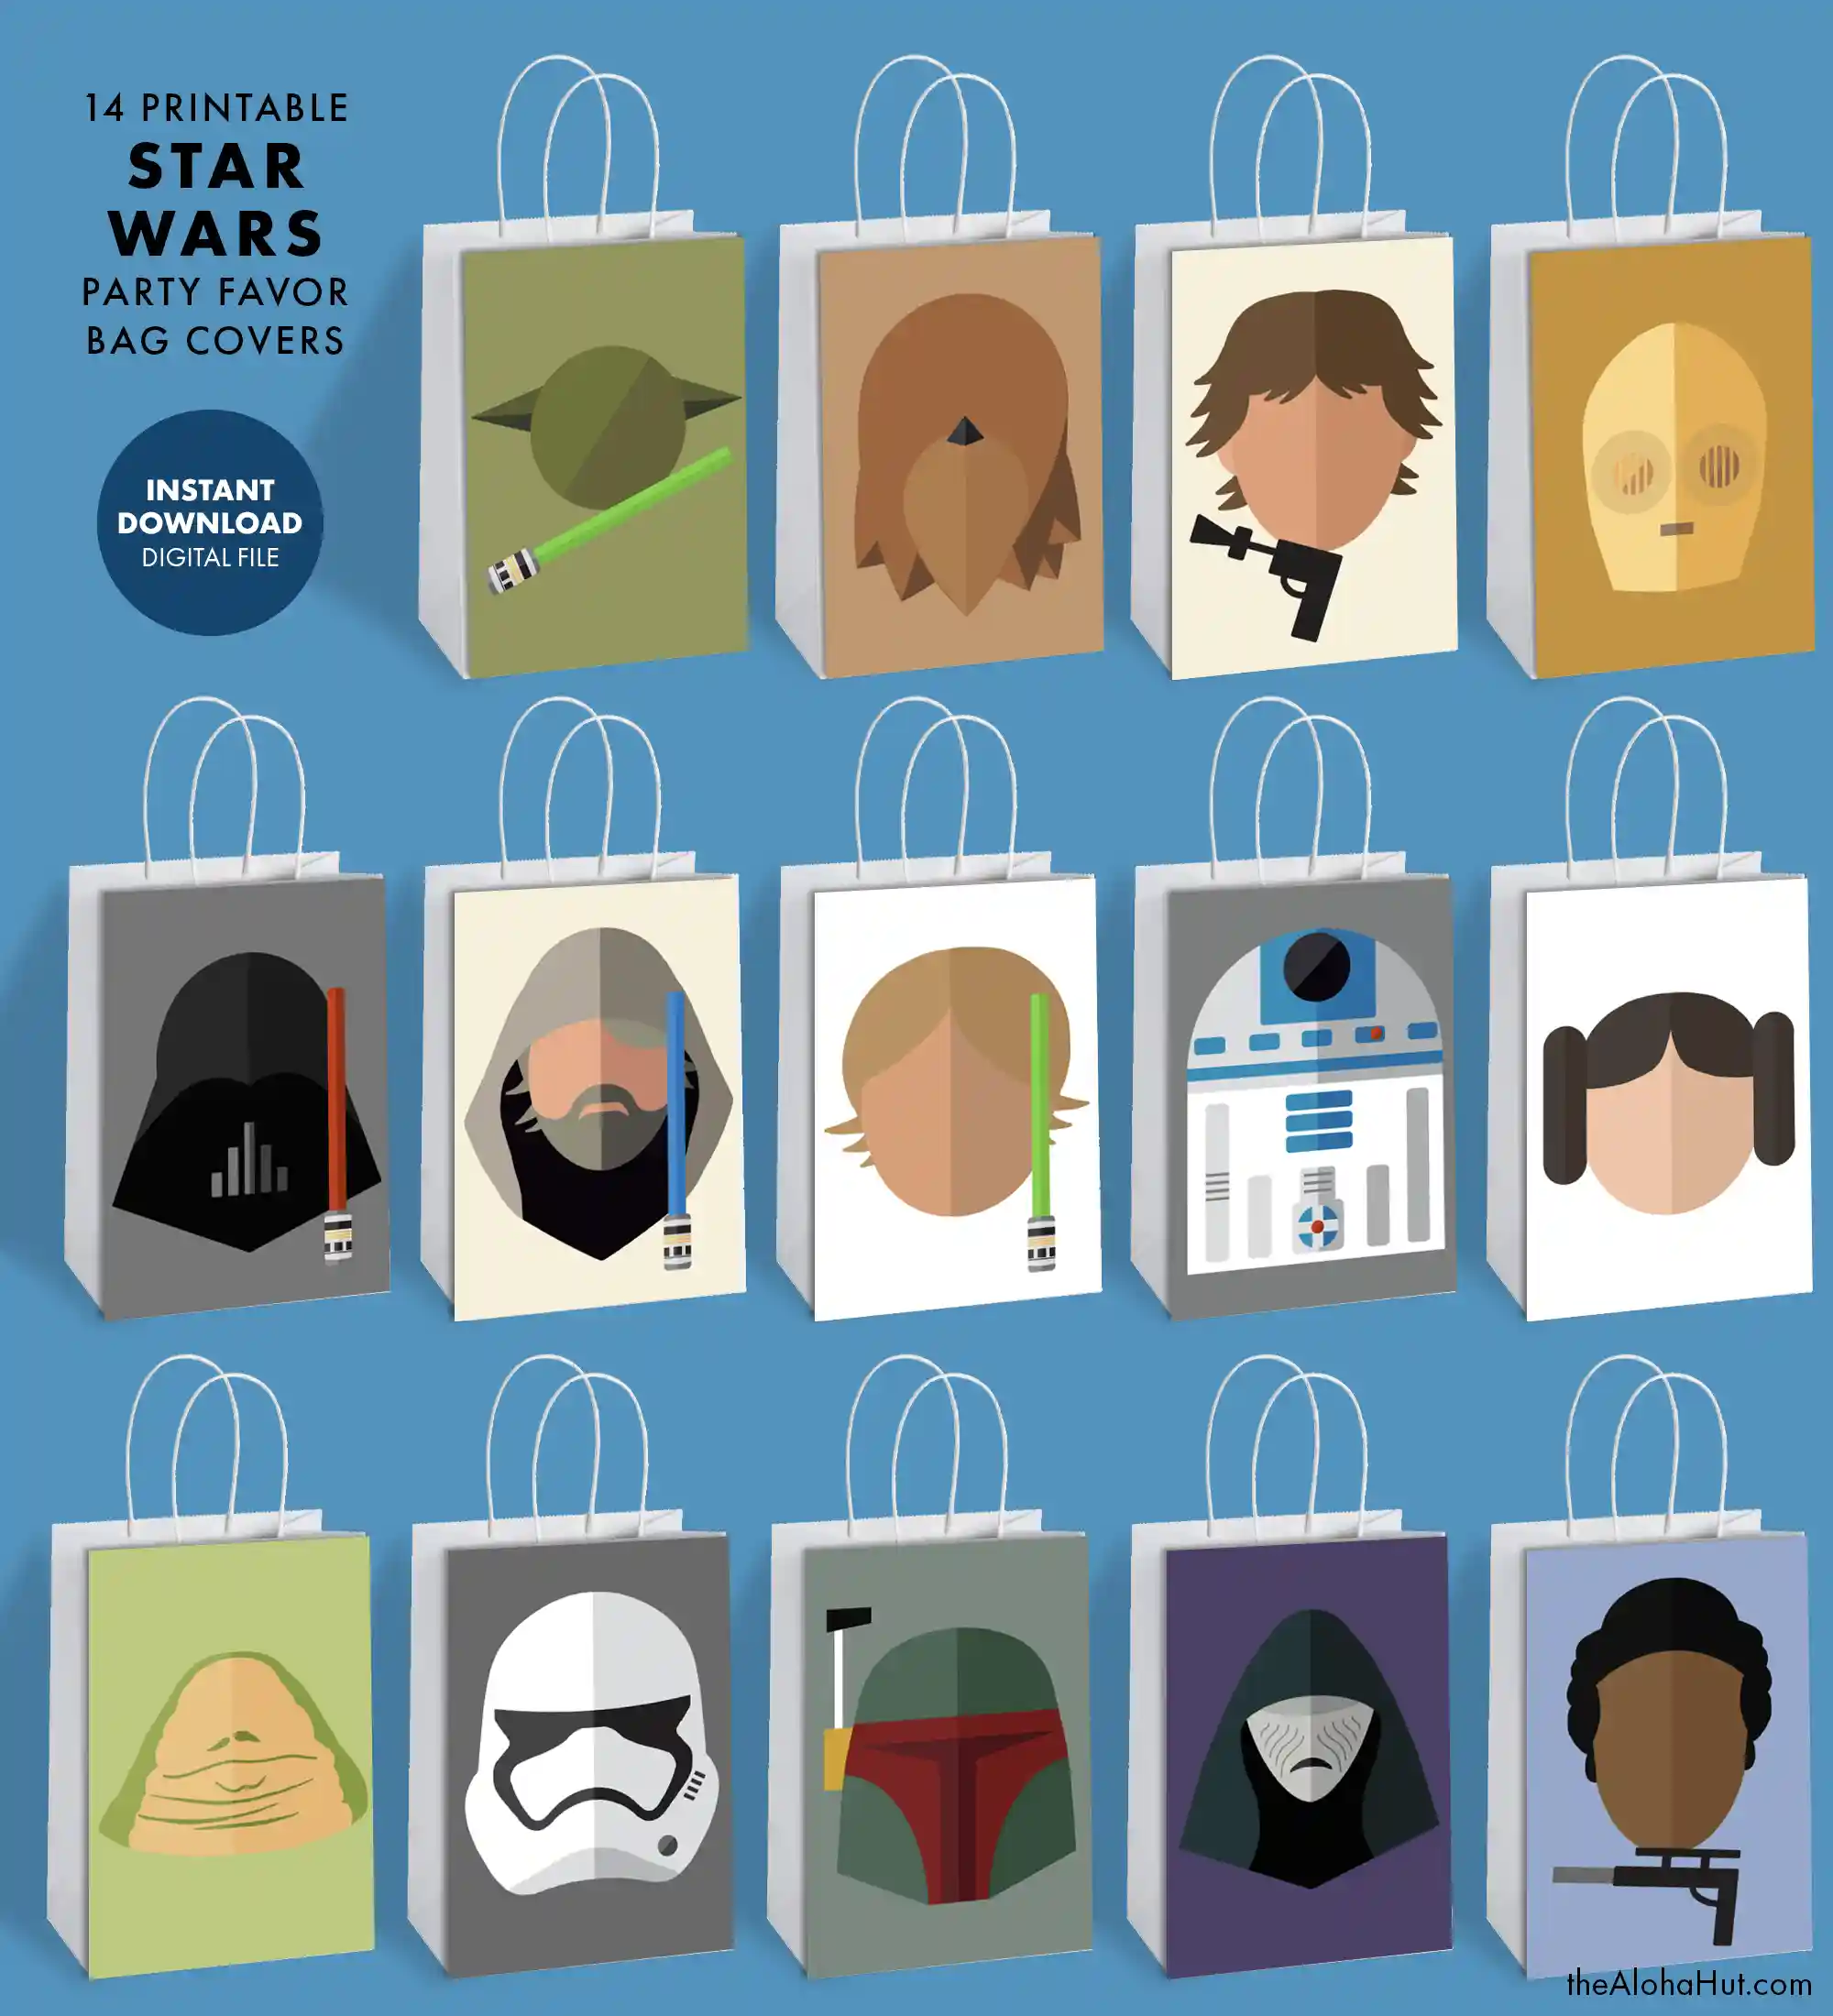 Star Wars party ideas, activities, birthday party games, decorations, and prints. Ideas and tips and tricks for throwing the best Star Wars themed kids birthday party, baby shower, or one with the force celebration. Includes Star Wars printable games, decorations (cupcake toppers, banners, gift tags, characters) and Star Wars party games (BINGO, scavenger hunt, pin the lightsaber on Yoda or Darth Vader). Star Wars character party favor bags prints.